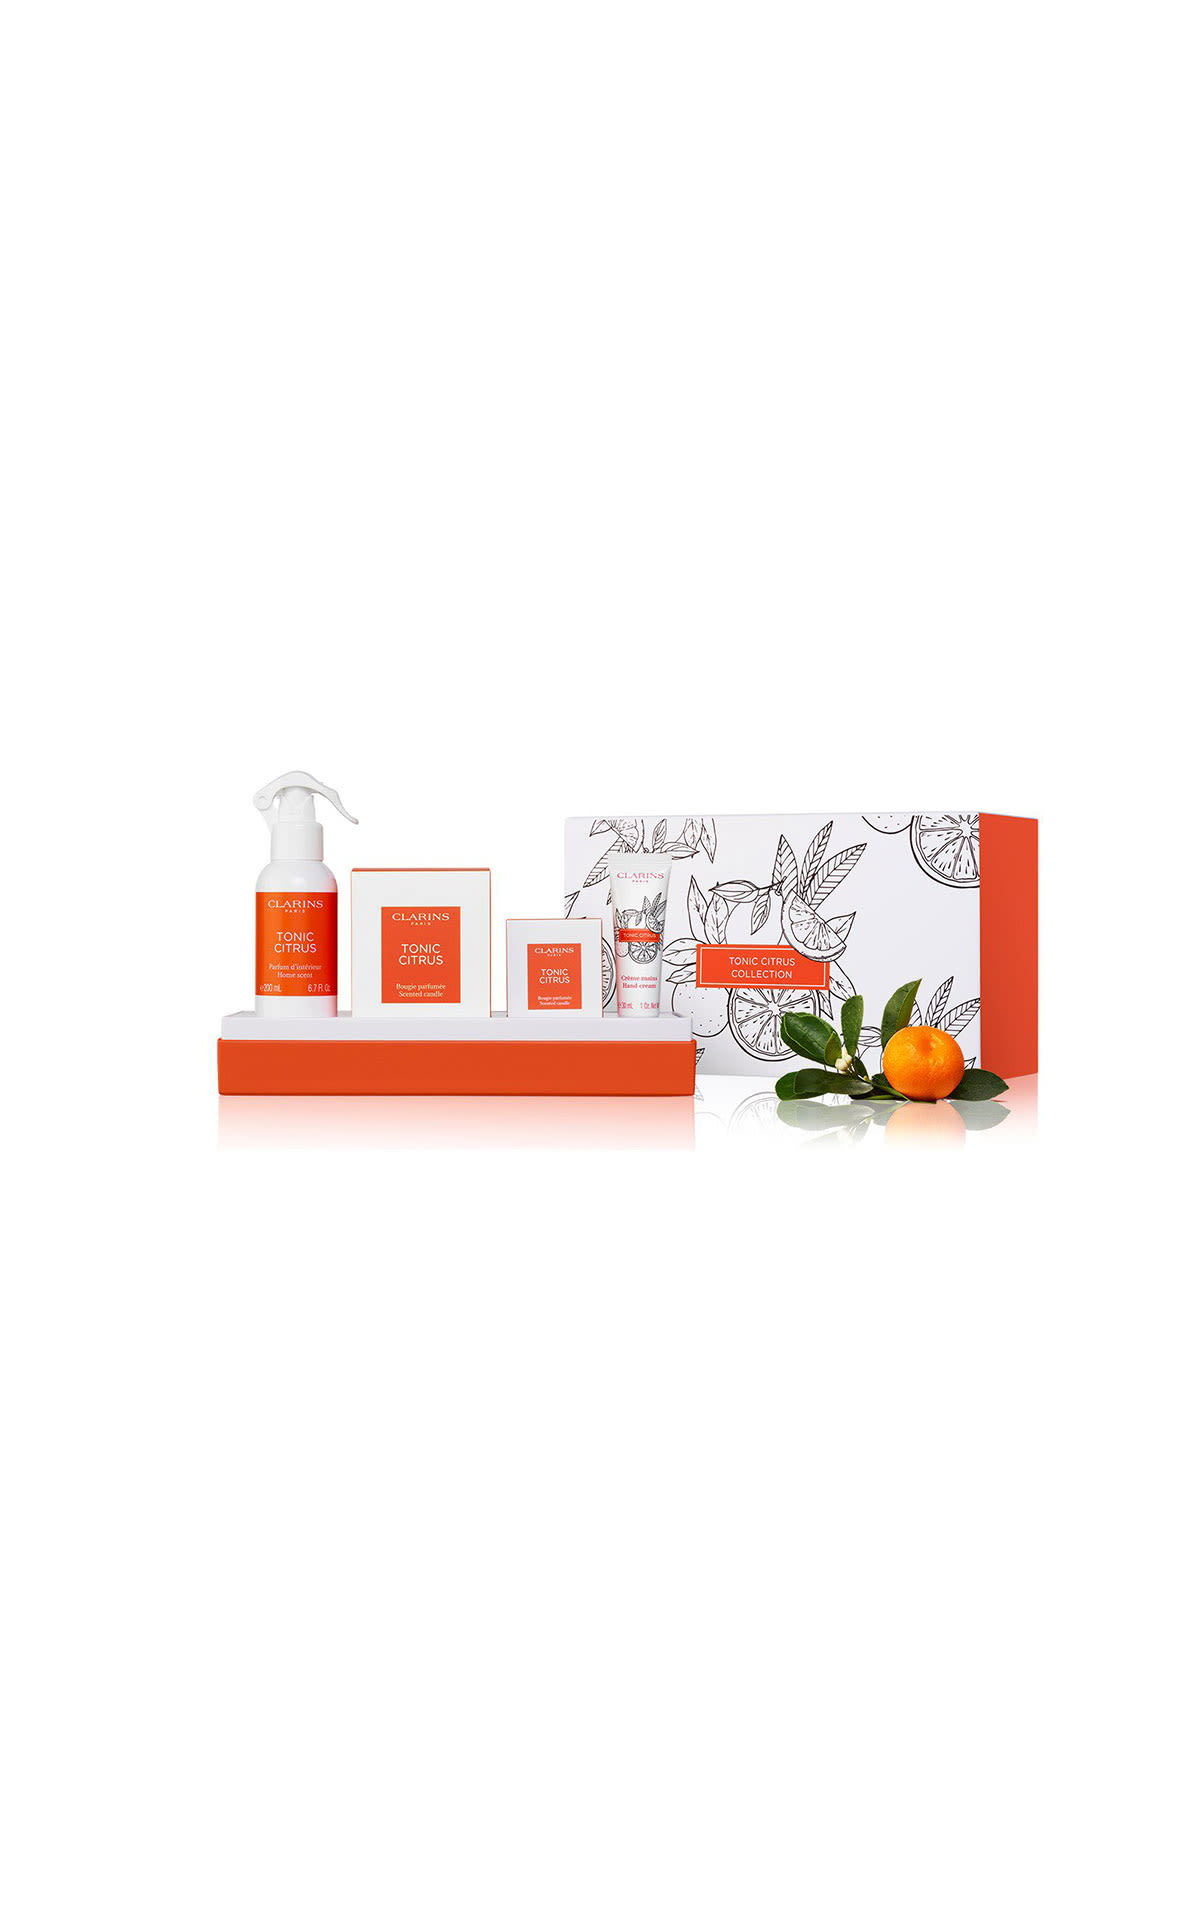 Clarins Tonic citrus home collection from Bicester Village